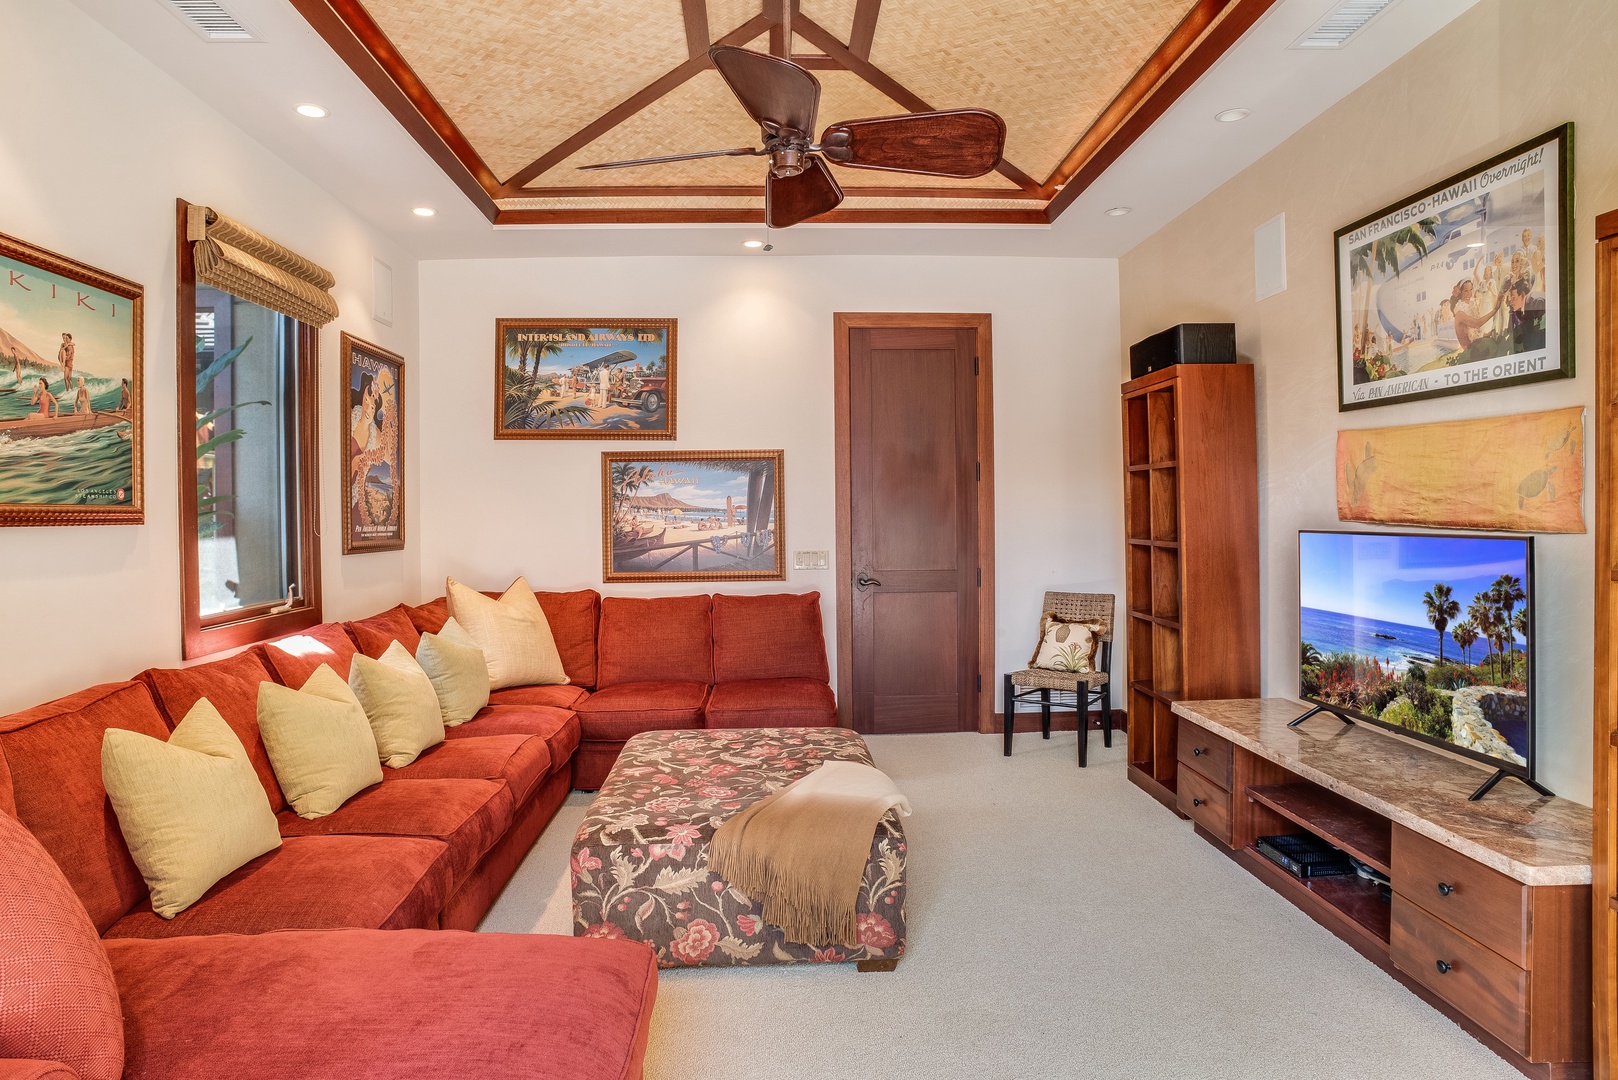 Kamuela Vacation Rentals, House of the Turtle at Champion Ridge, Mauna Lani (CR 18) - The bonus Media Room can be set up as an additional bedroom.